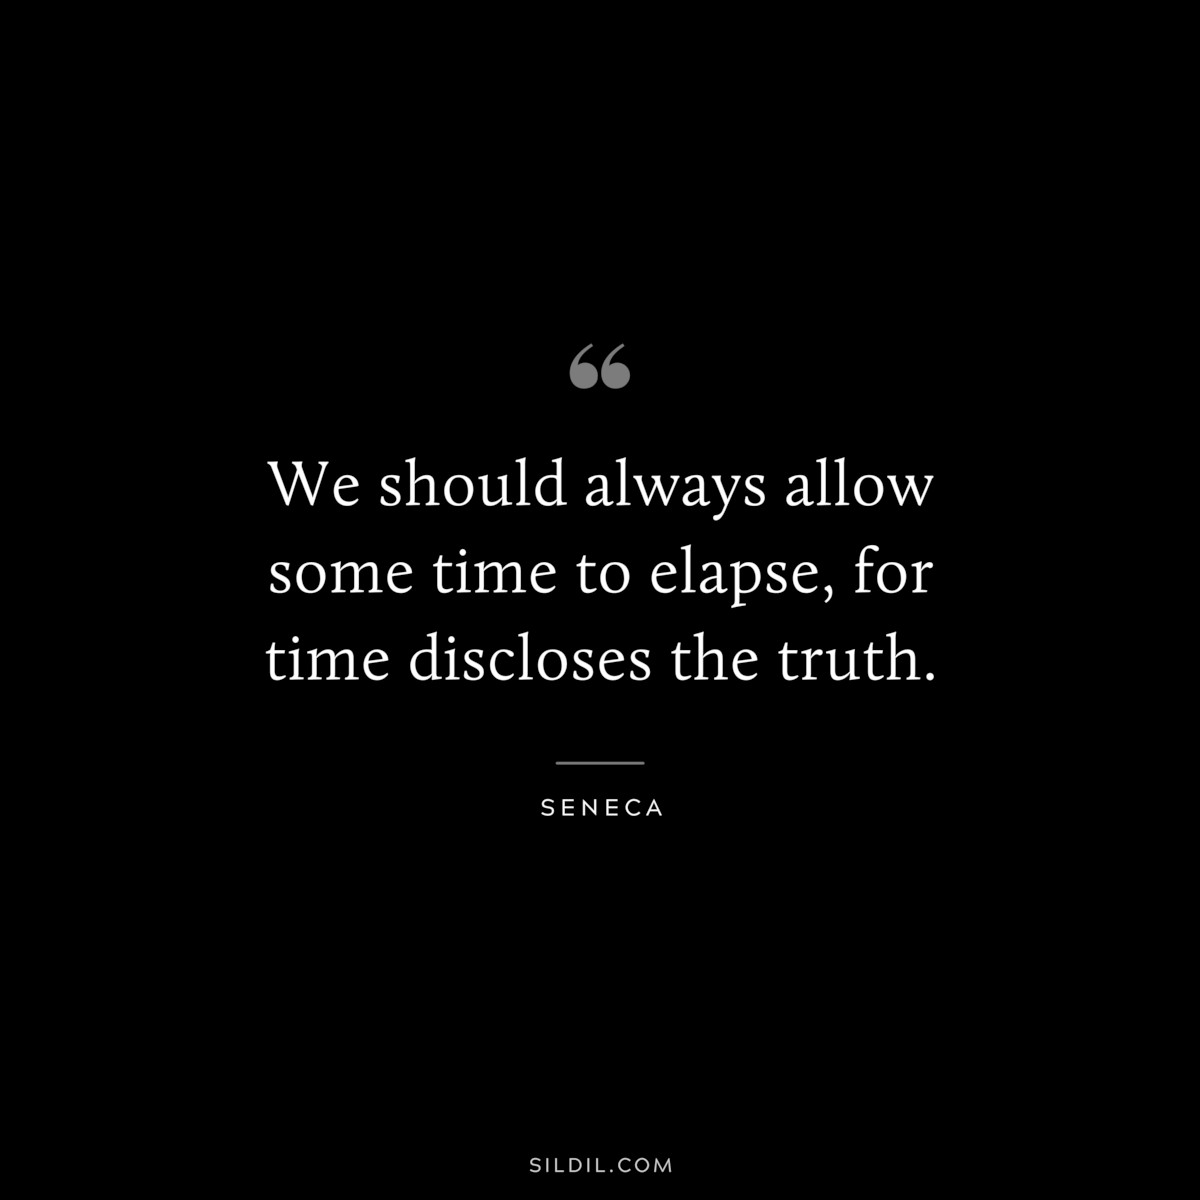 We should always allow some time to elapse, for time discloses the truth. ― Seneca